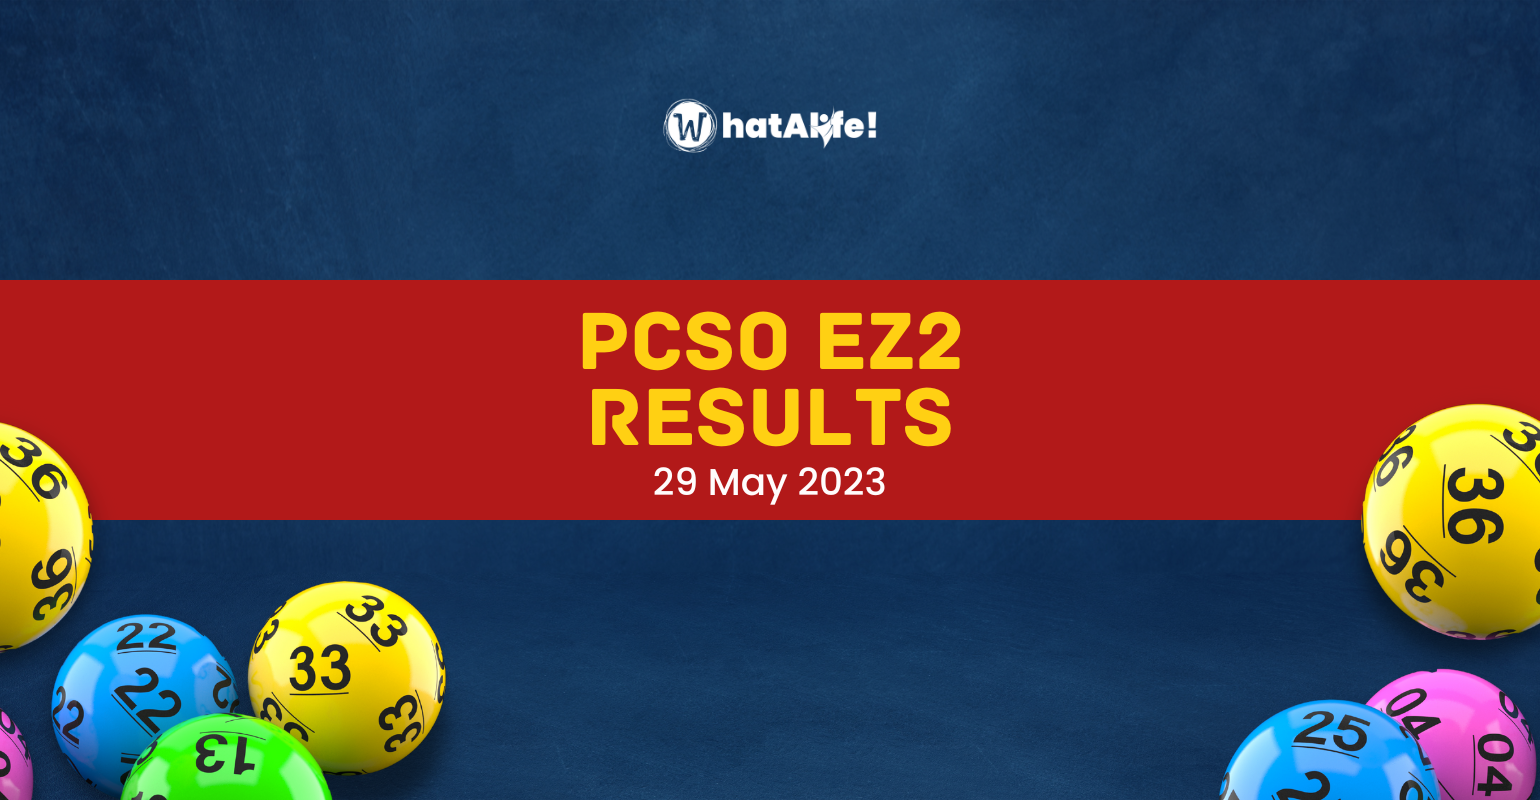 EZ2 2D RESULTS May 29, 2023 (Monday)